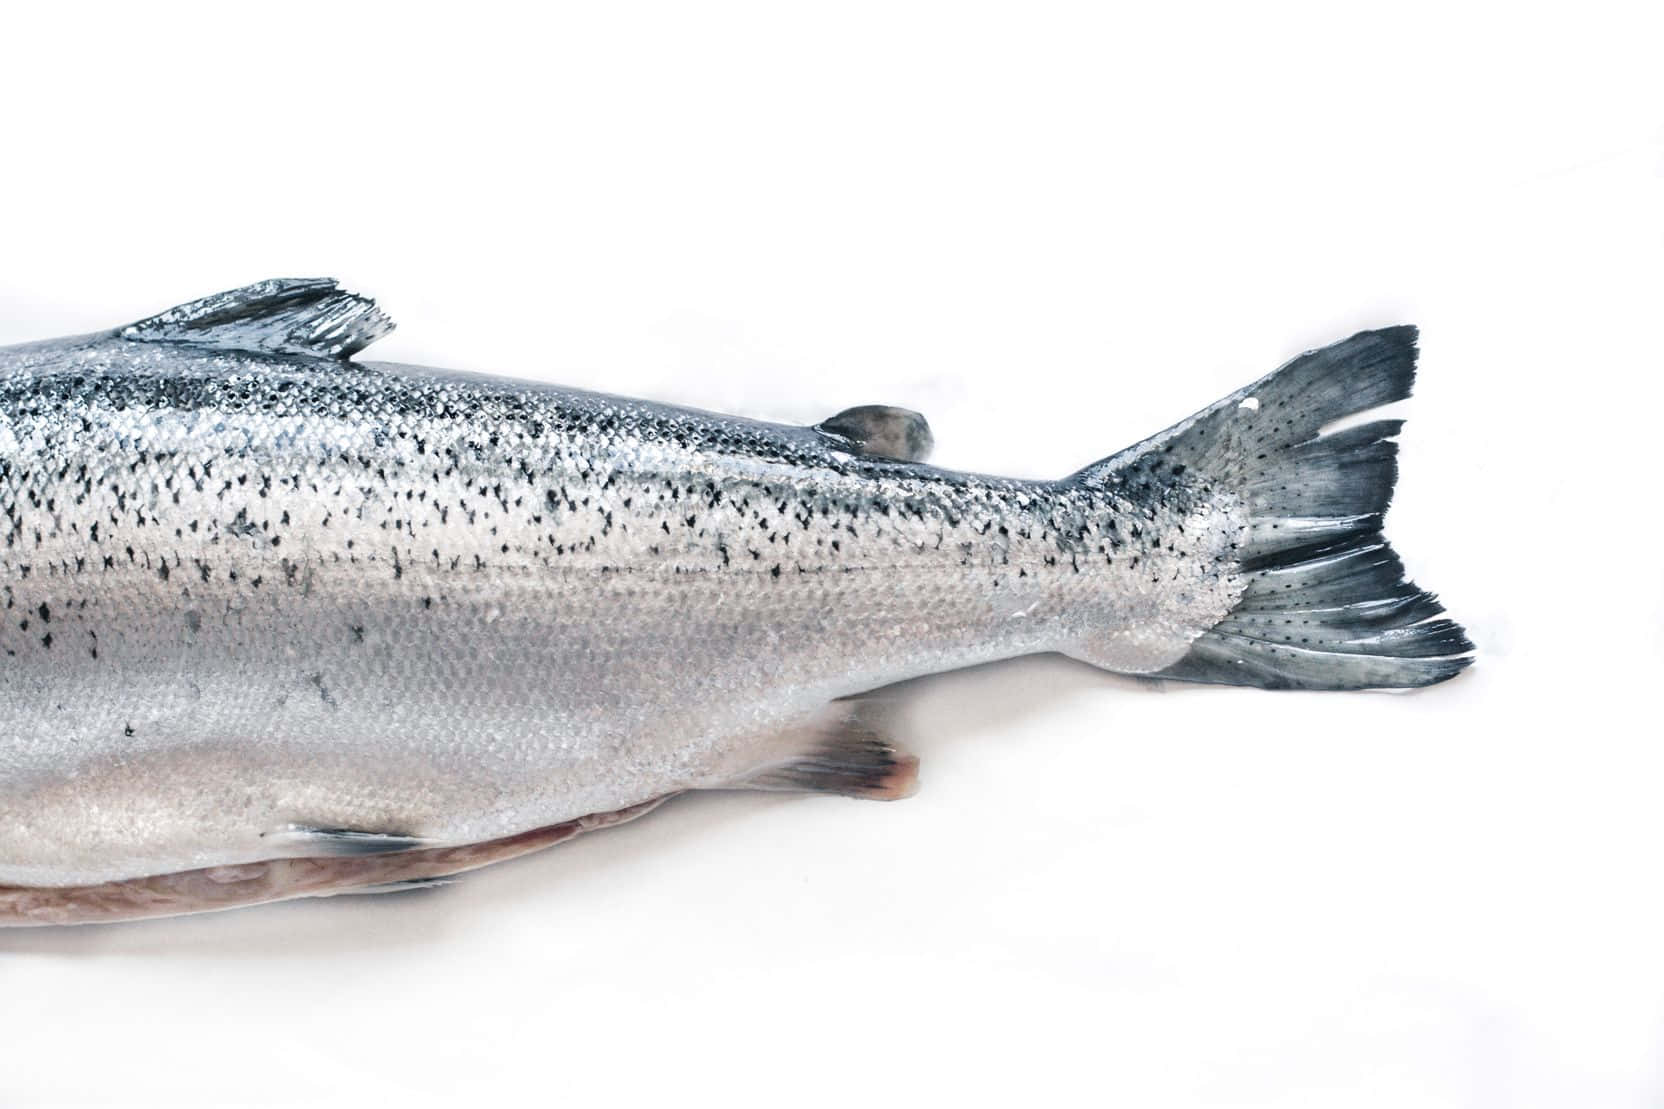 A Large Salmon Is Shown On A White Background